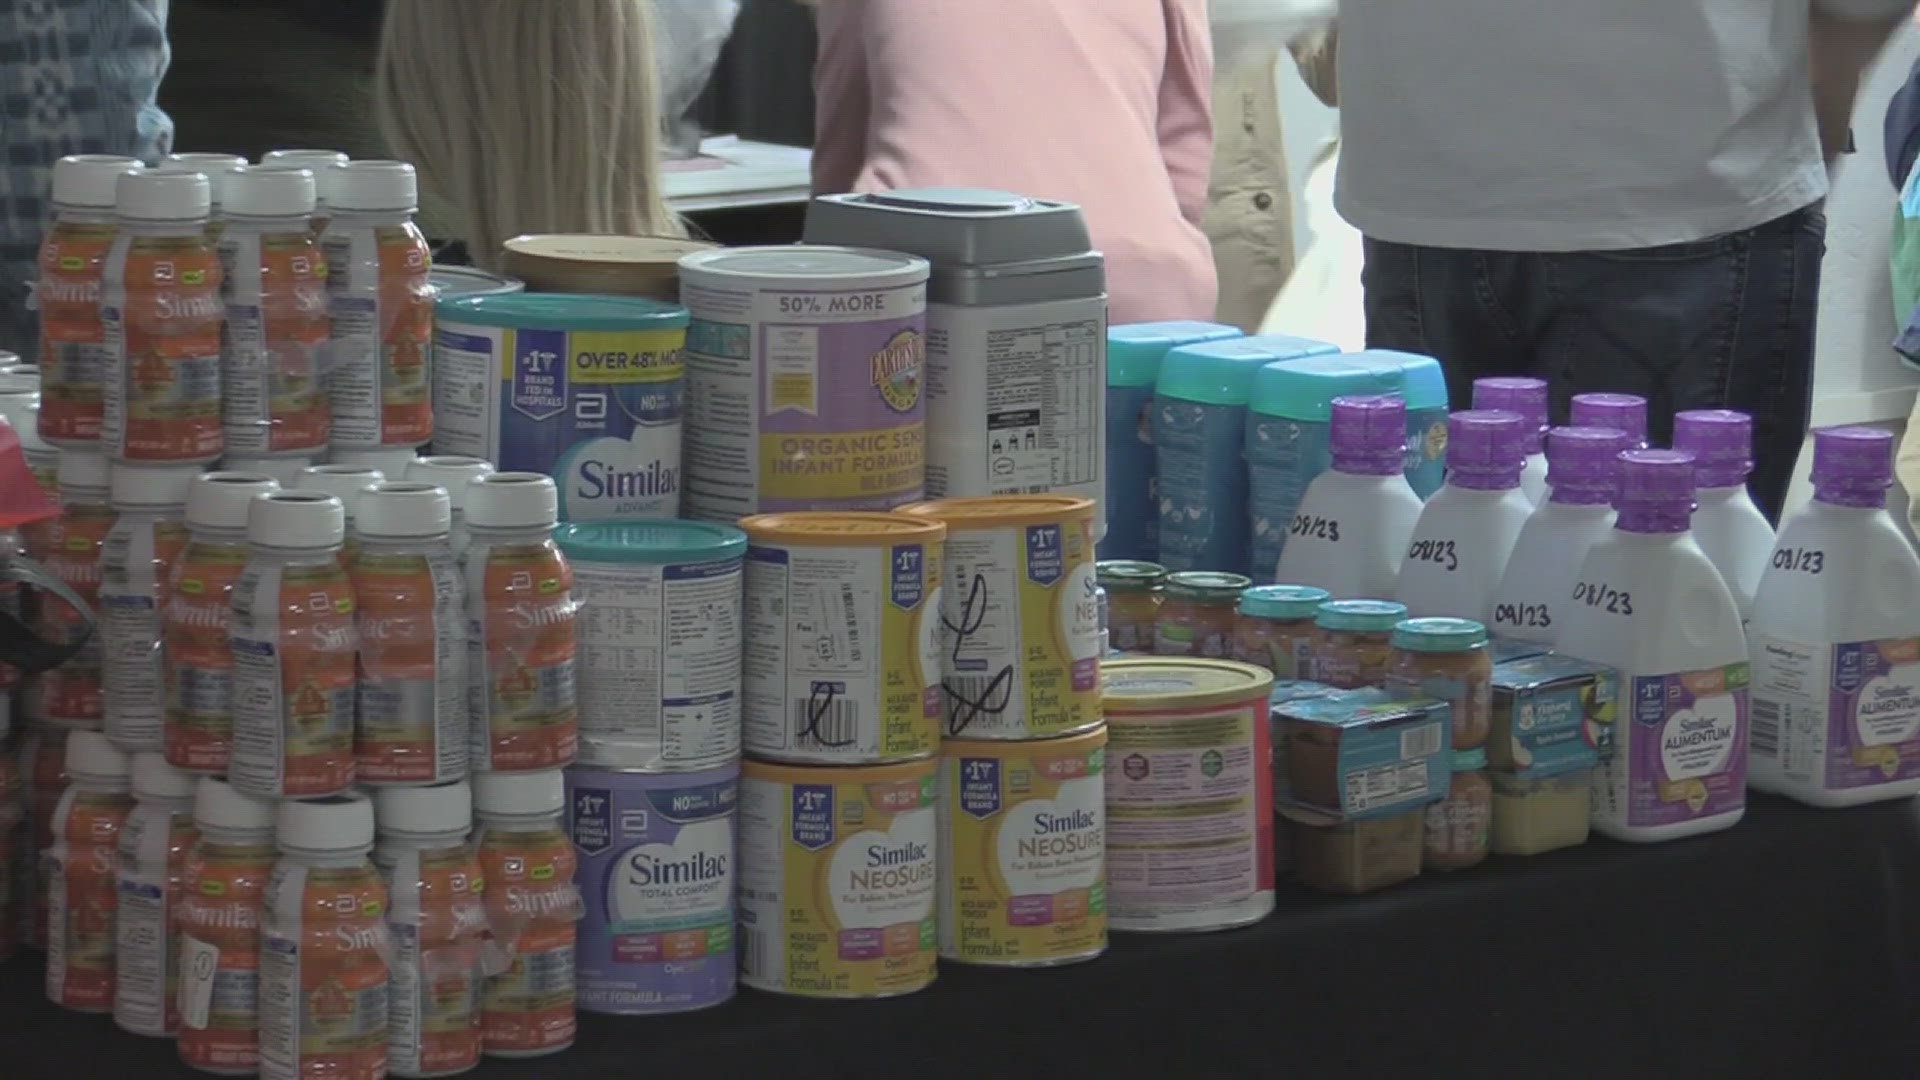 The event helped multiple families with items donated from 14 organizations and members of the church.